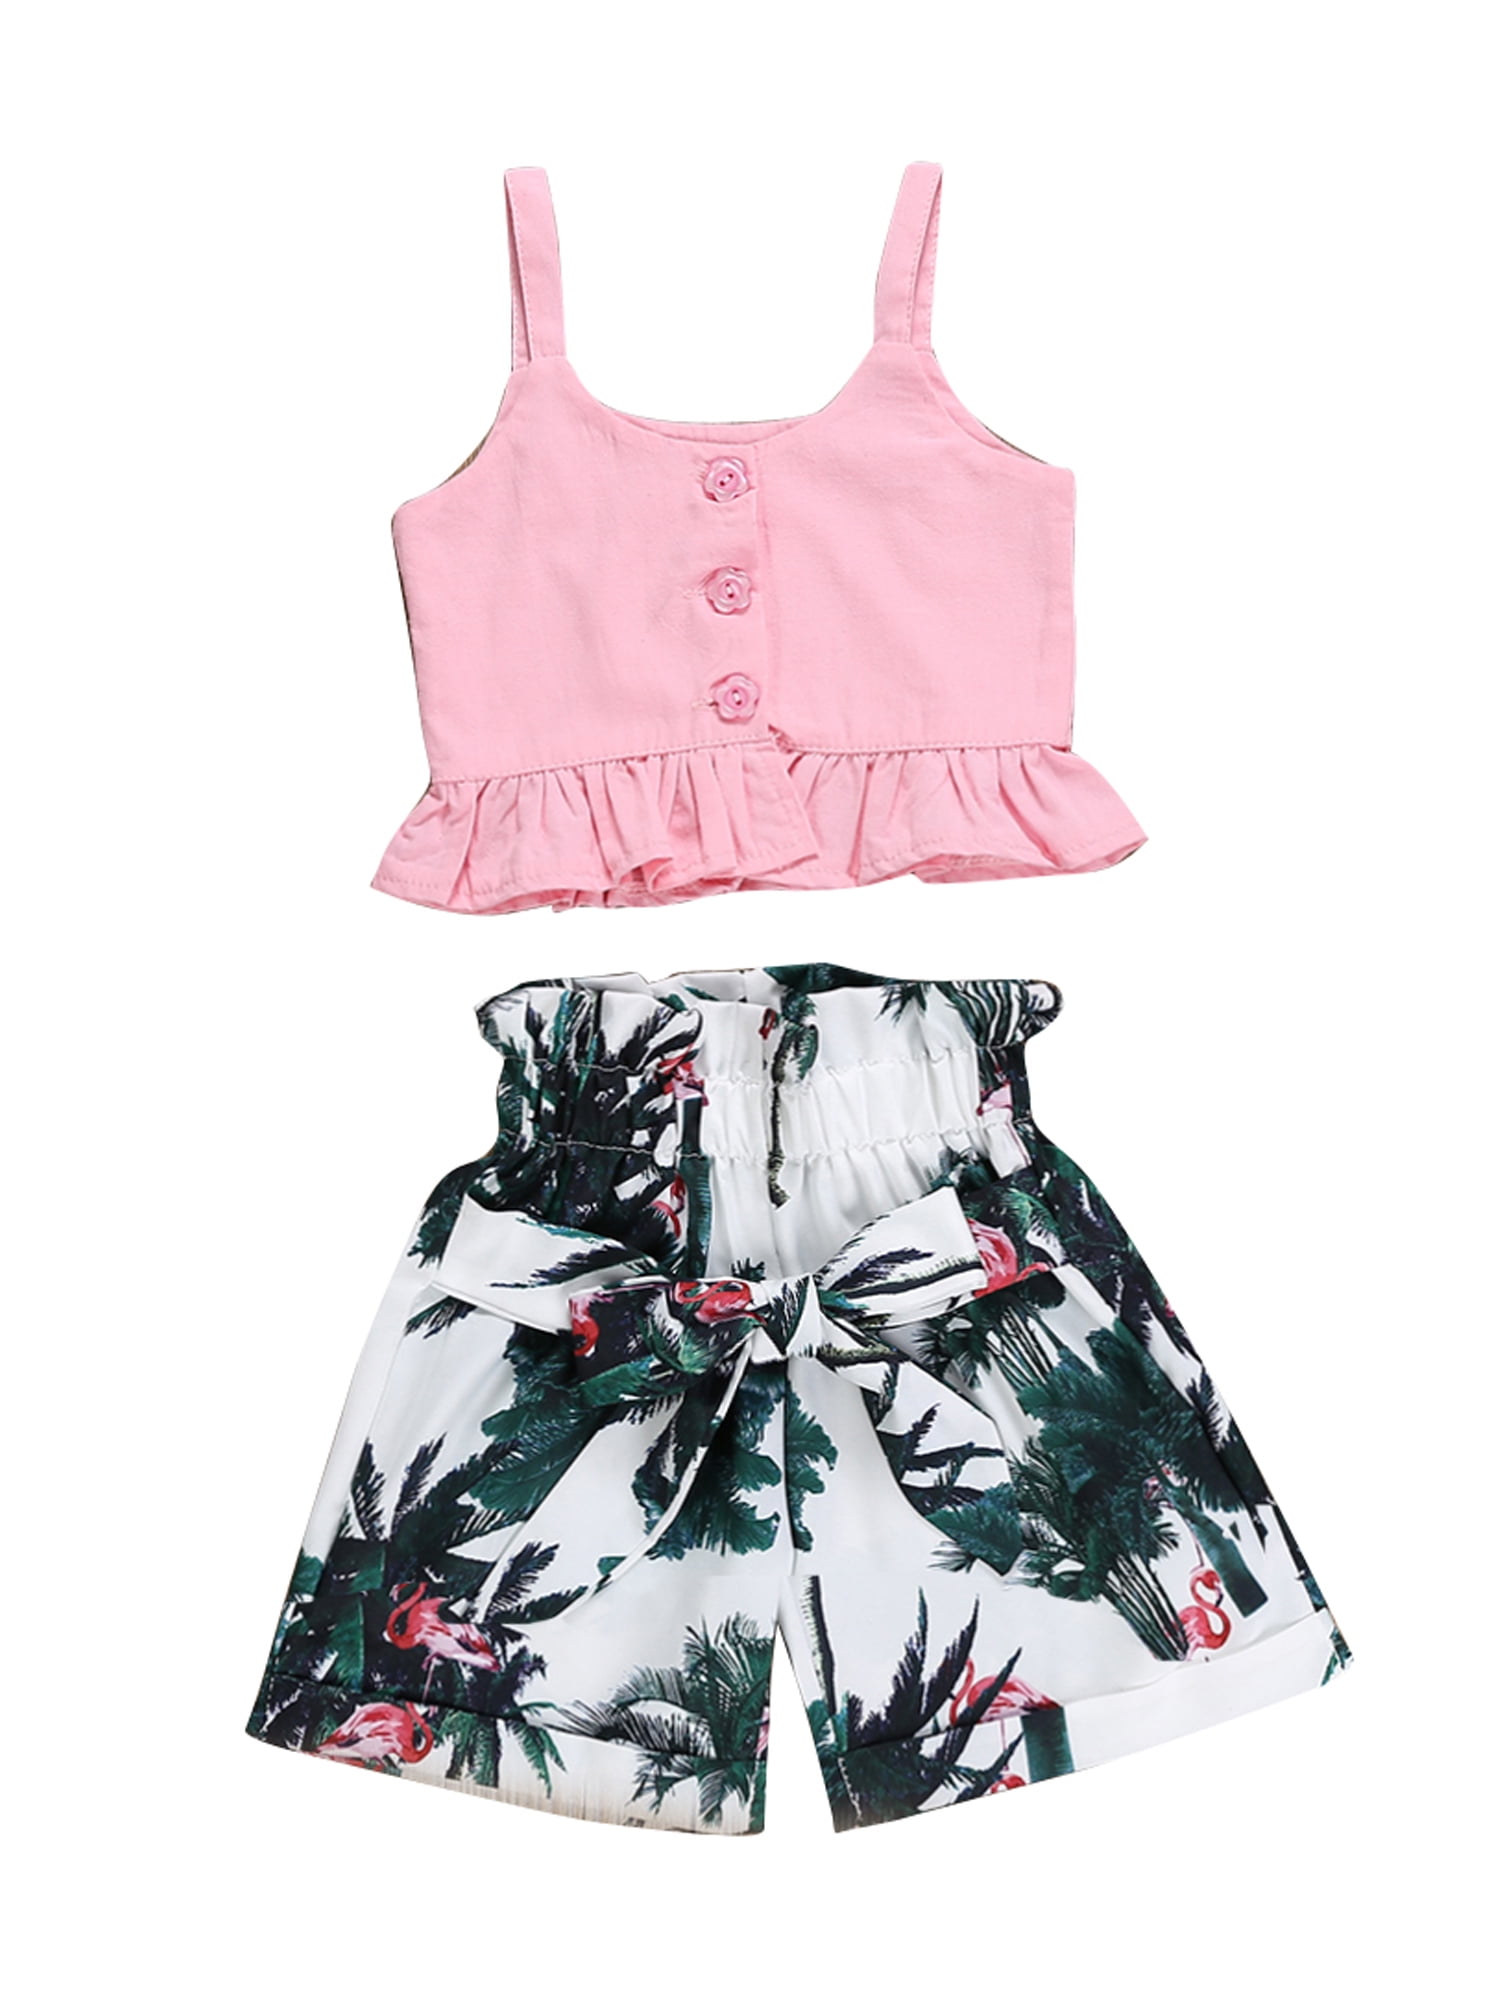 Kids Baby Girl Summer Outfit Cotton Pink Ruffle Tank Crop Top Floral Shorts Bow Clothes Set Two Piece